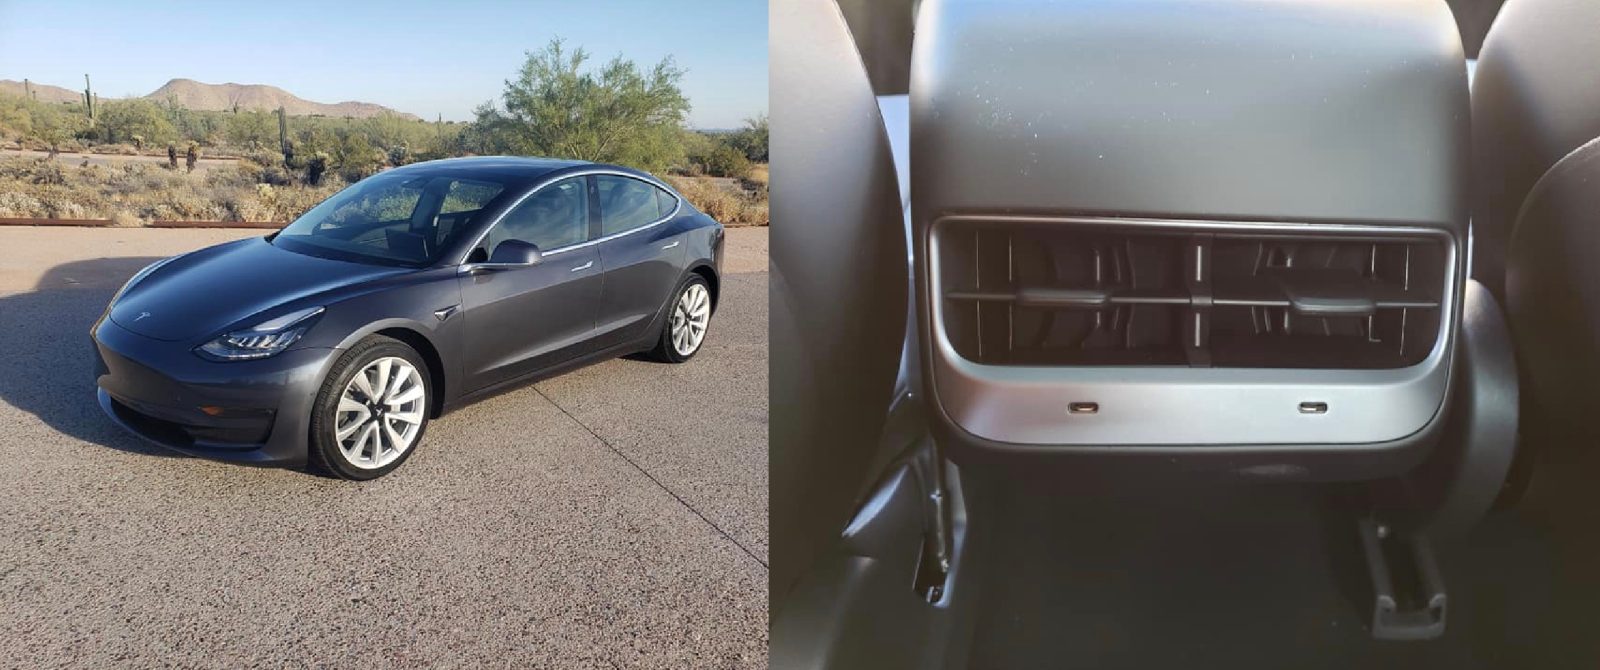 Tesla Upgrades Us Made Model 3 With Wireless Charger And Usb C Ports Electrek